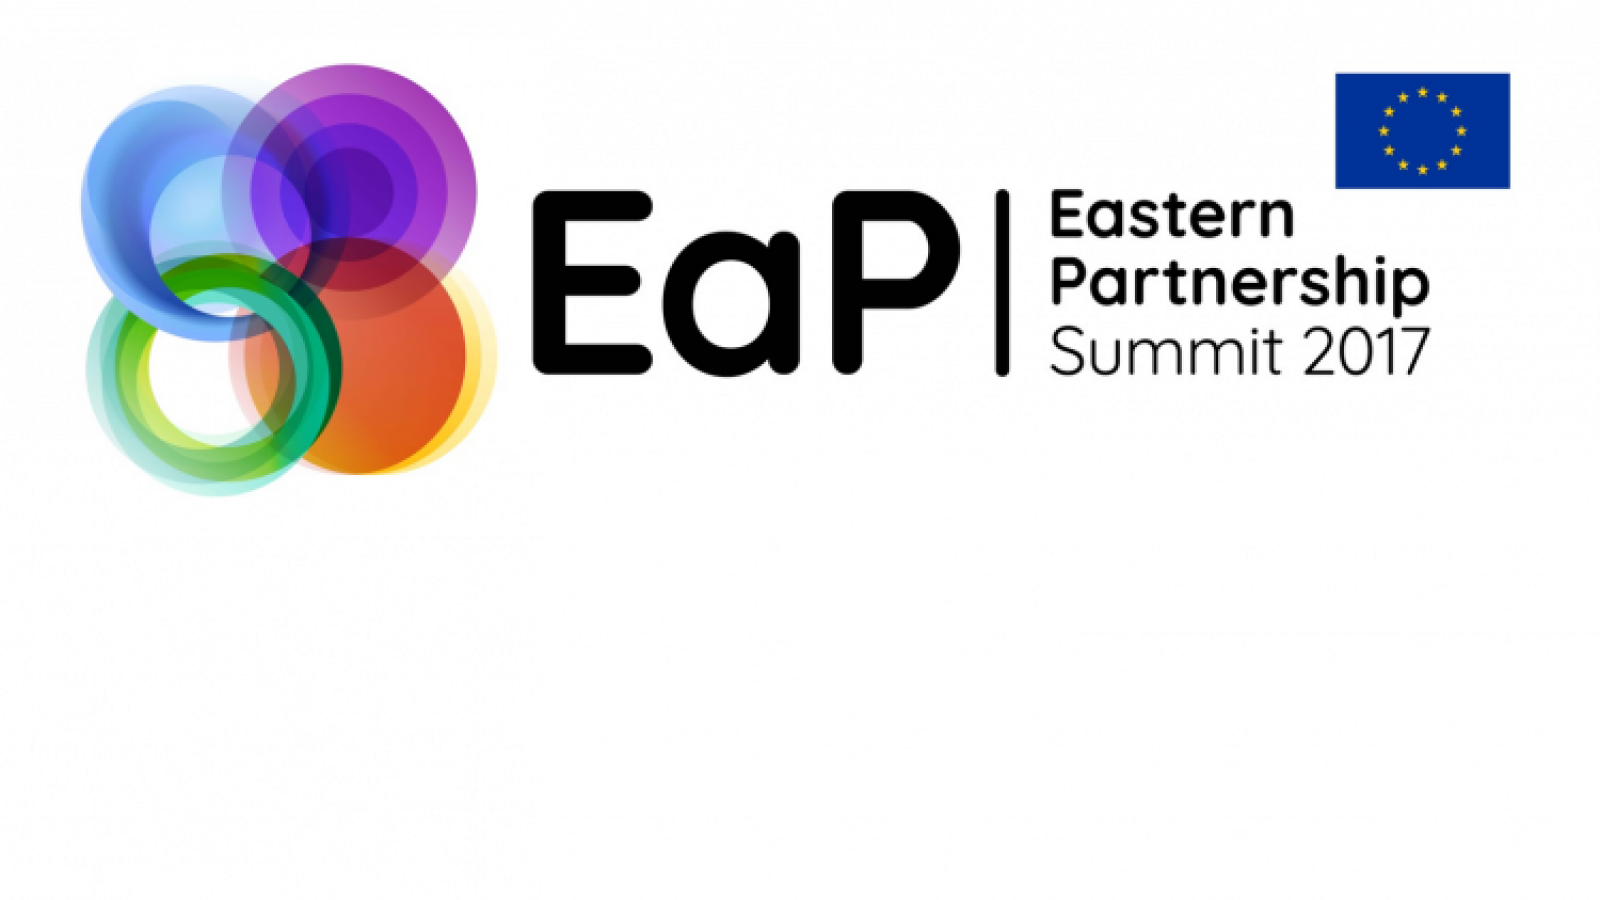 Eastern Partnership summit to look at achievements and 20 key deliverables for 2020